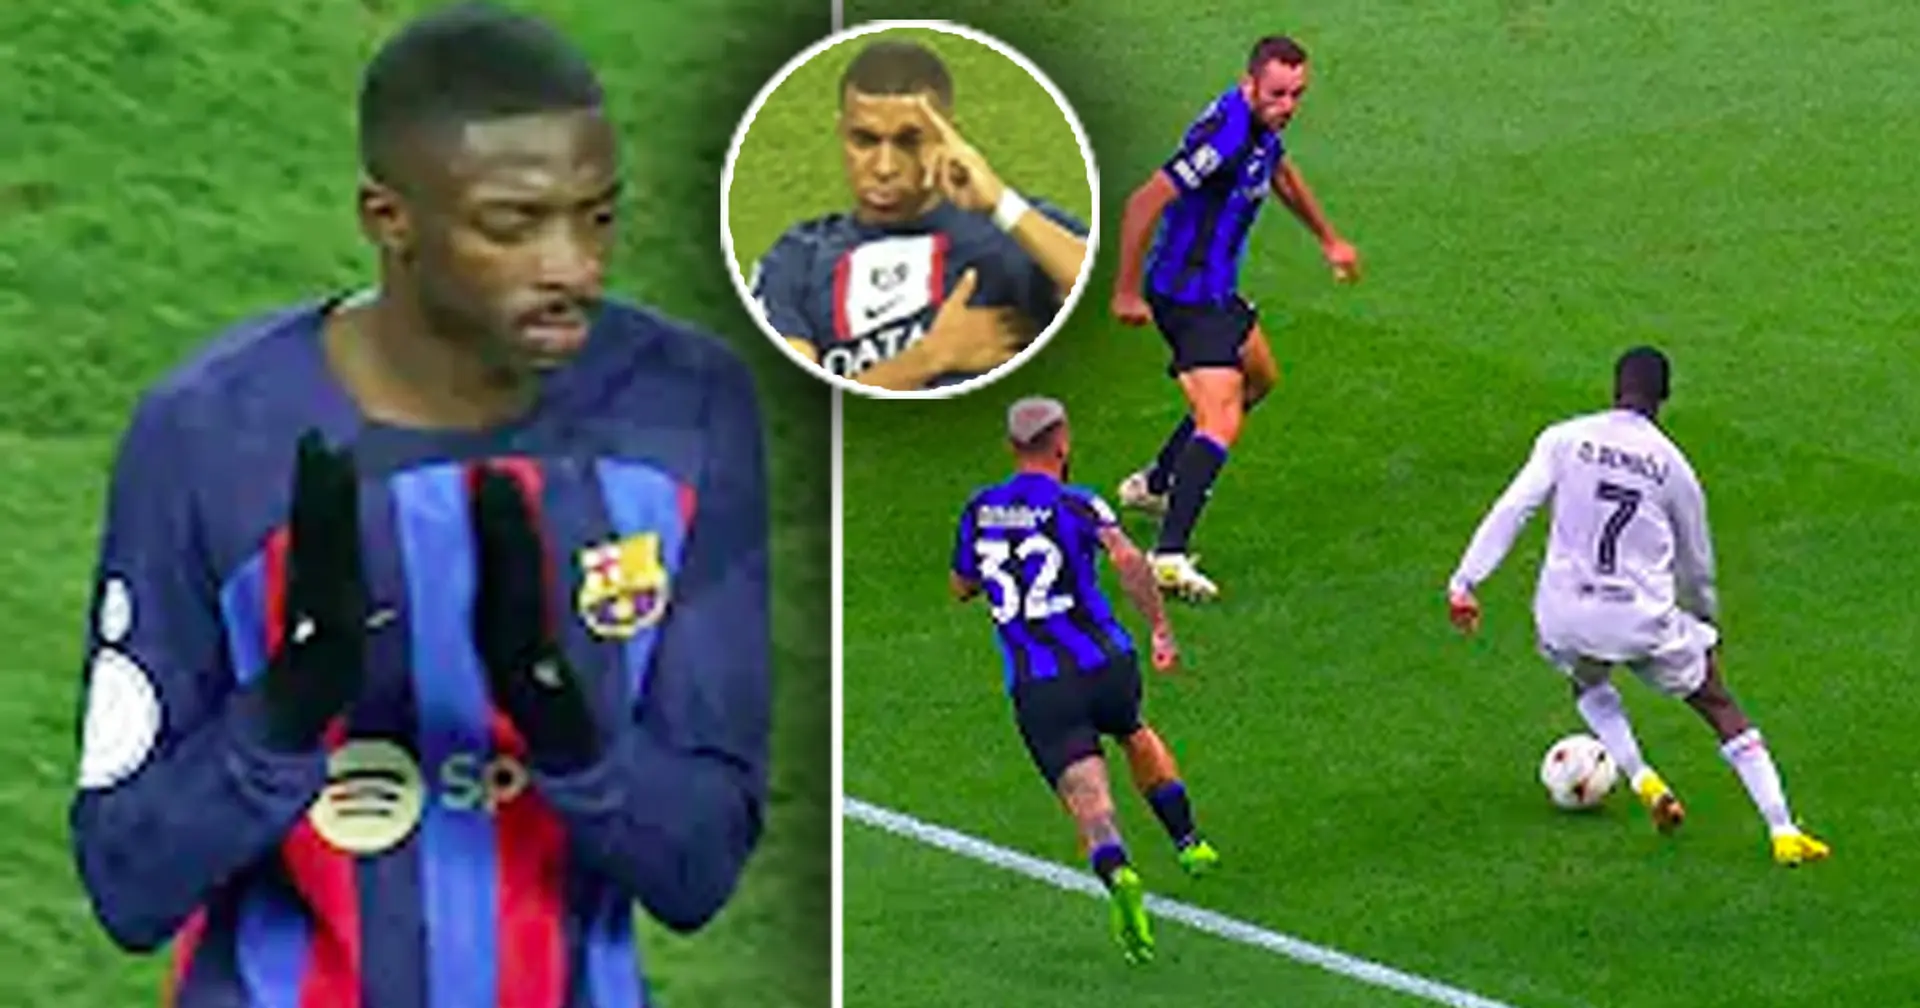 Does Dembele do anything better than Mbappe these days? Analysed